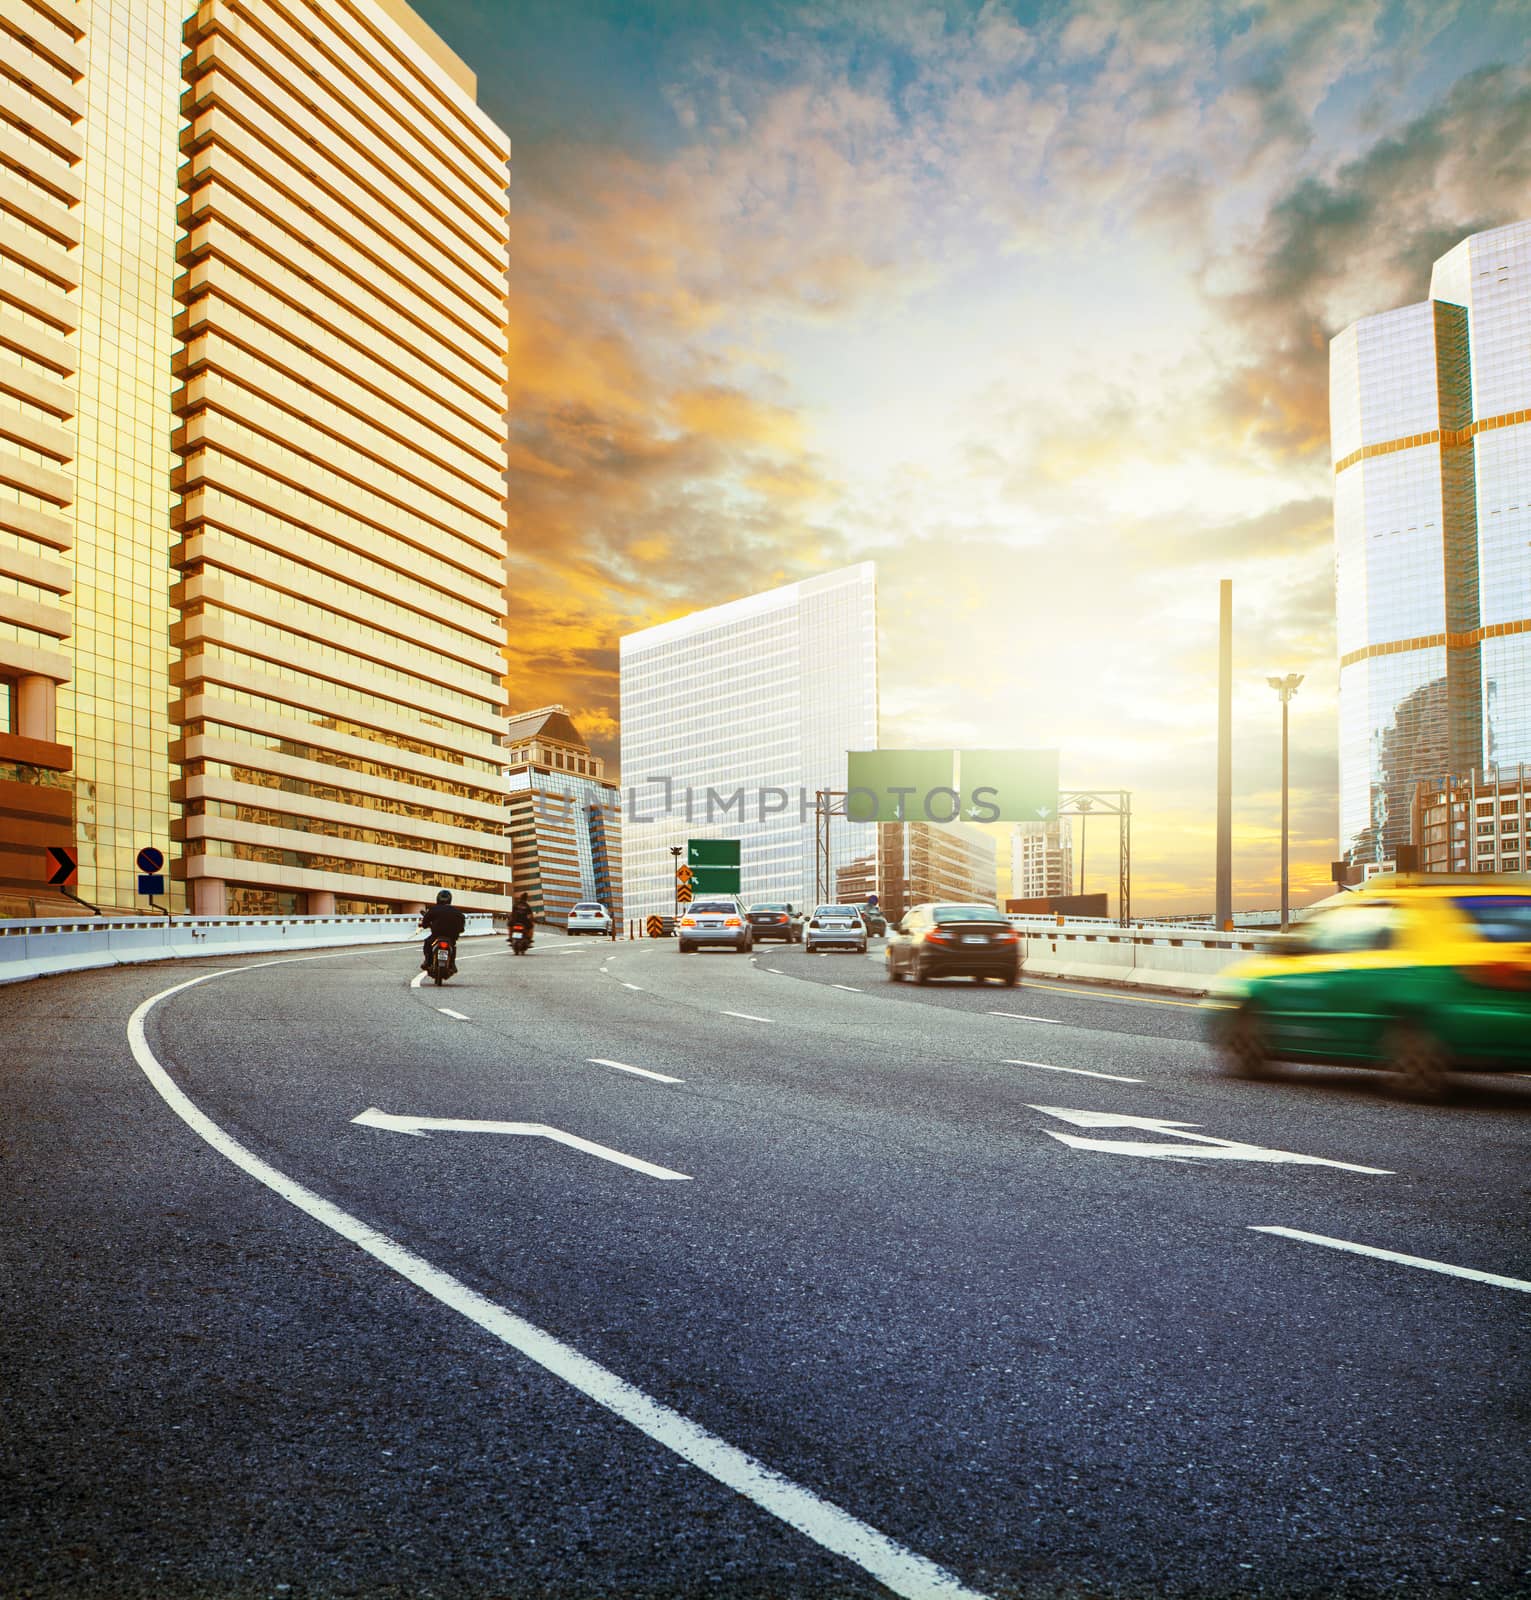 land transport with sun set urban scene use for city life backgr by khunaspix